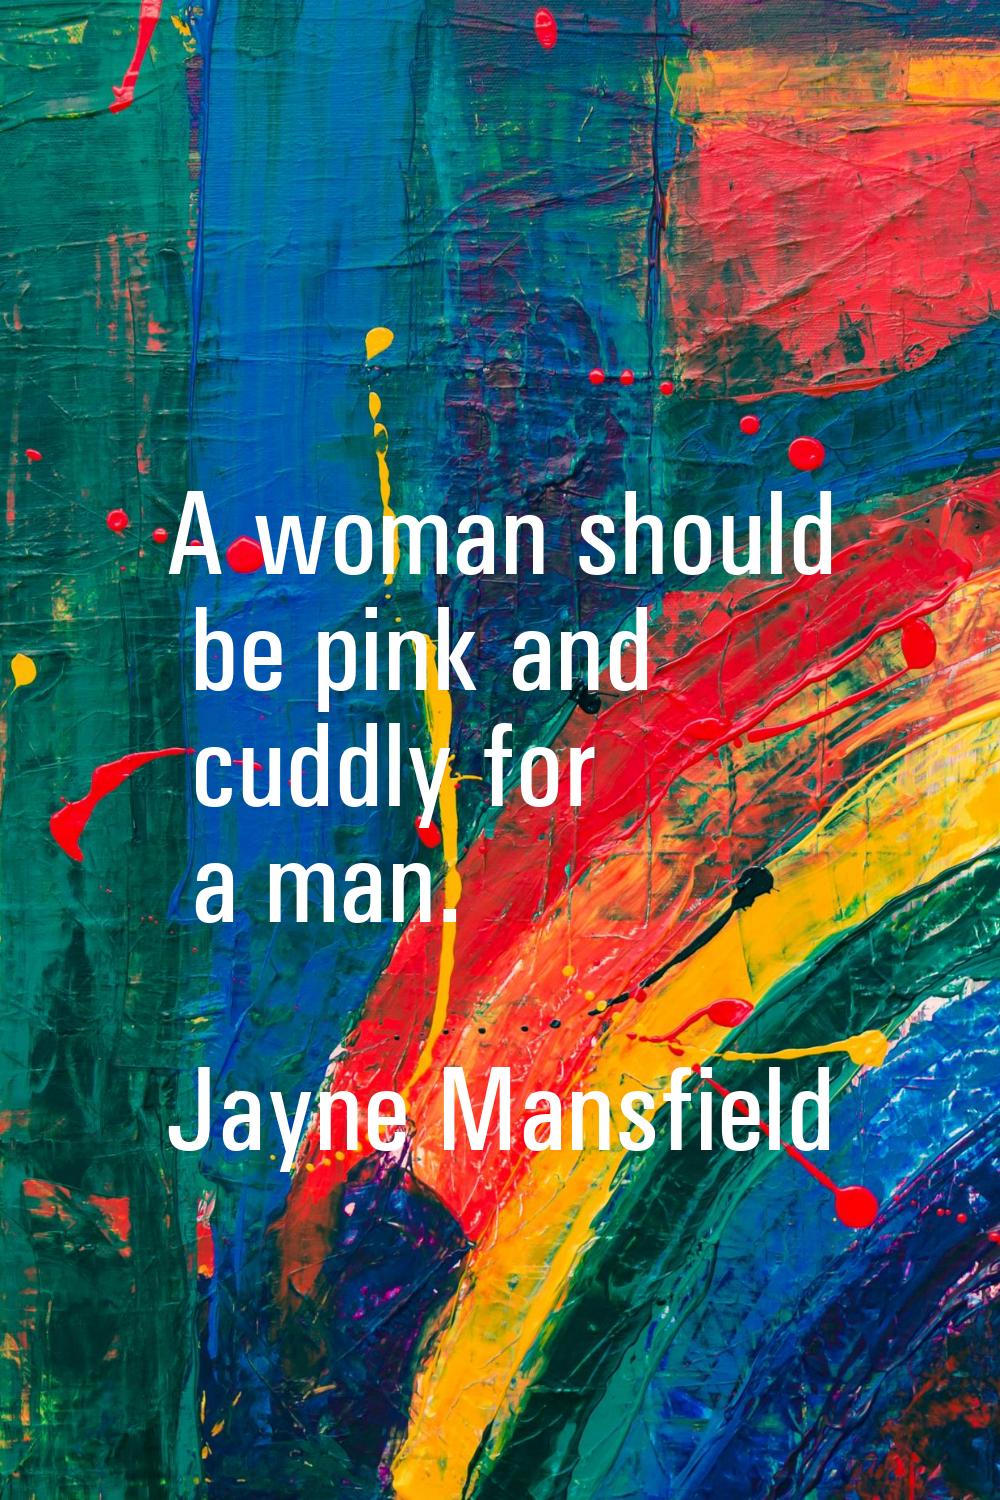 A woman should be pink and cuddly for a man.